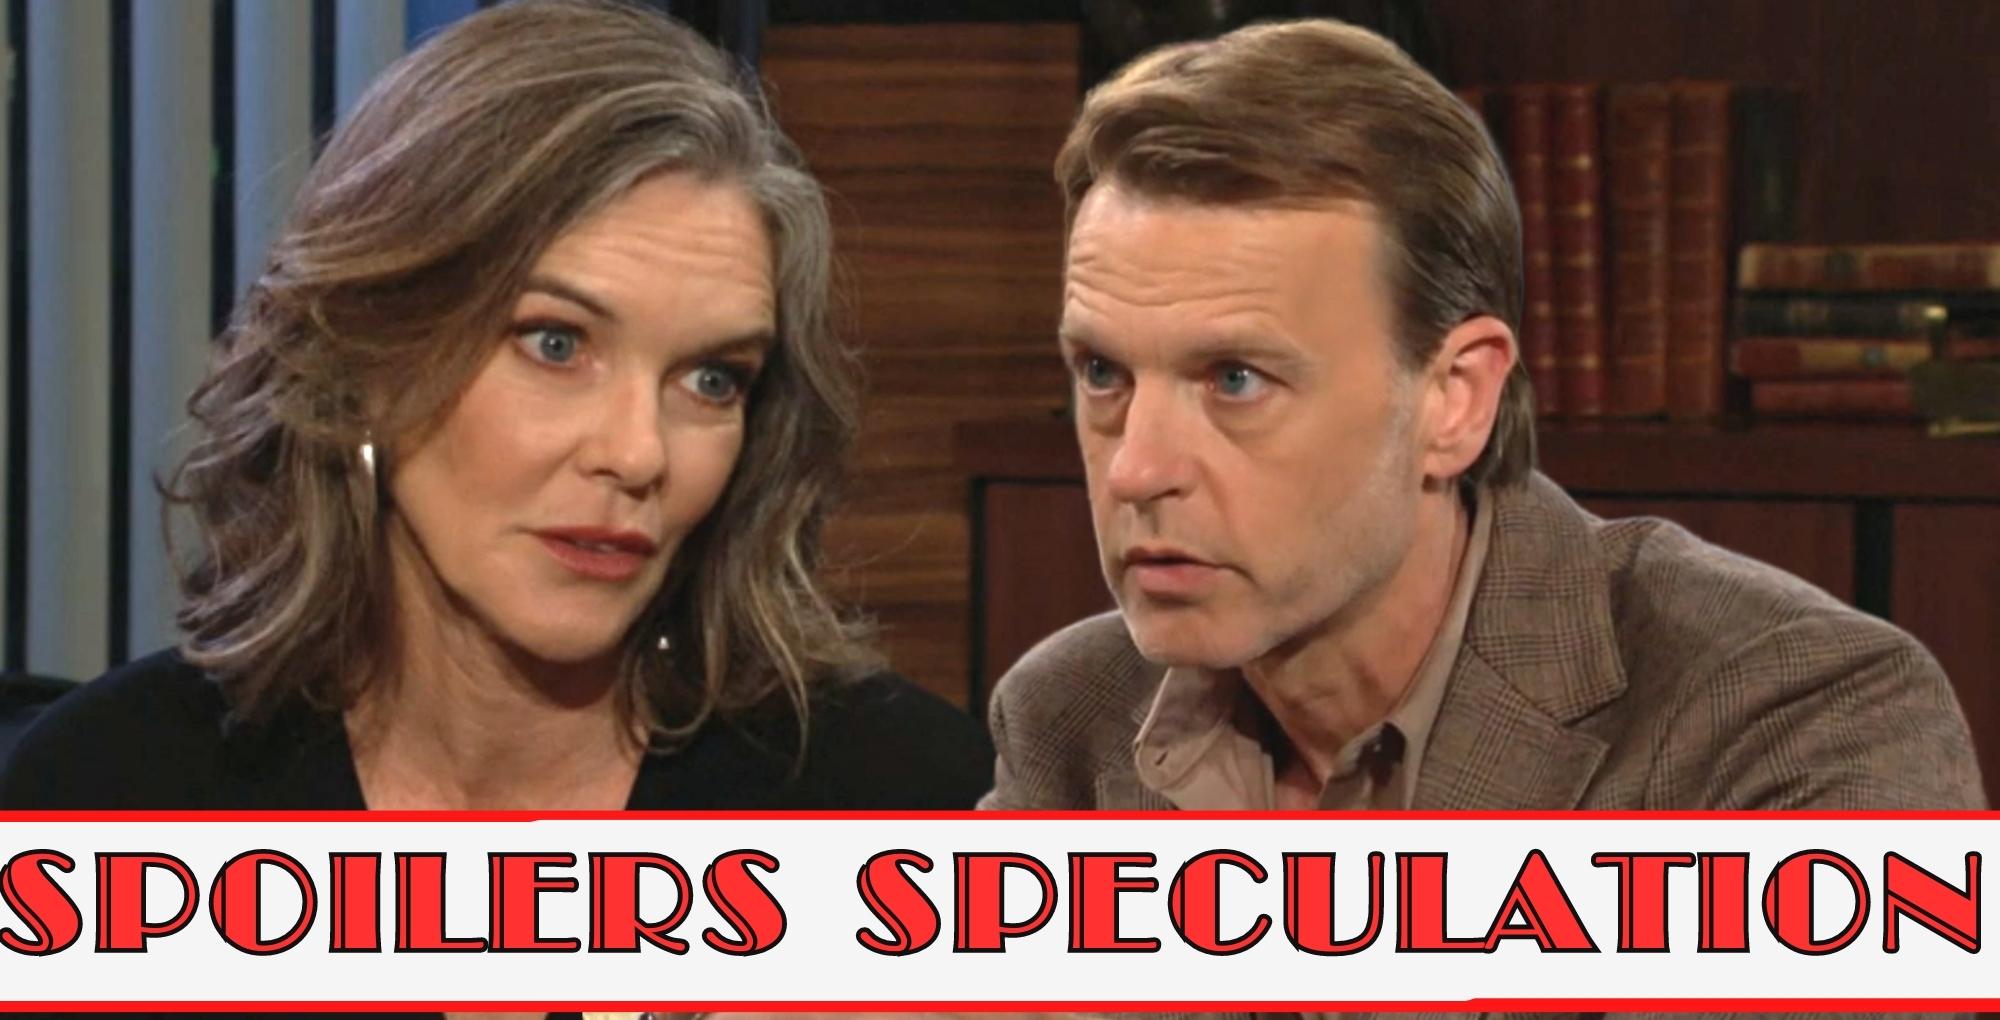 tucker and diane the young and the restless spoiler speculation